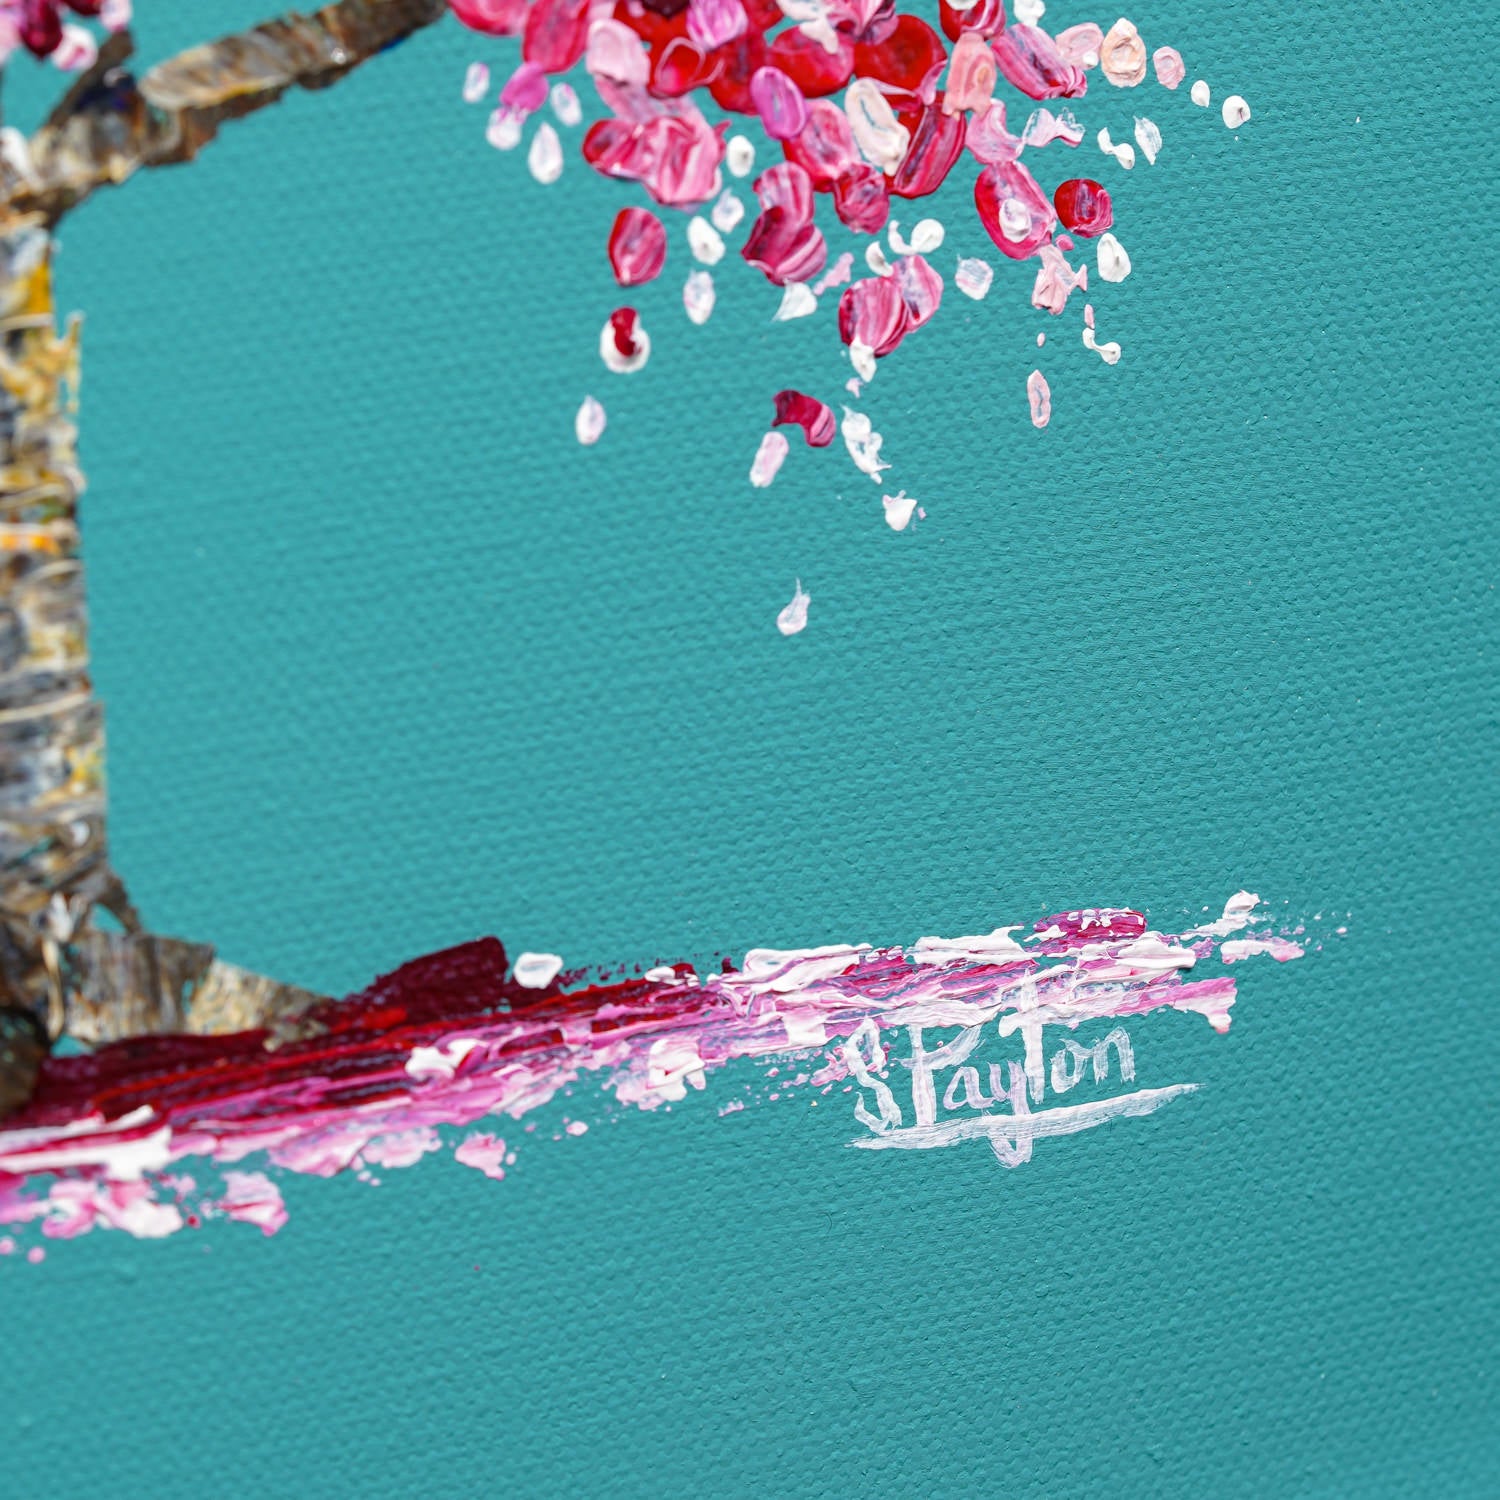 Cherry Blossom tree painting with teal background